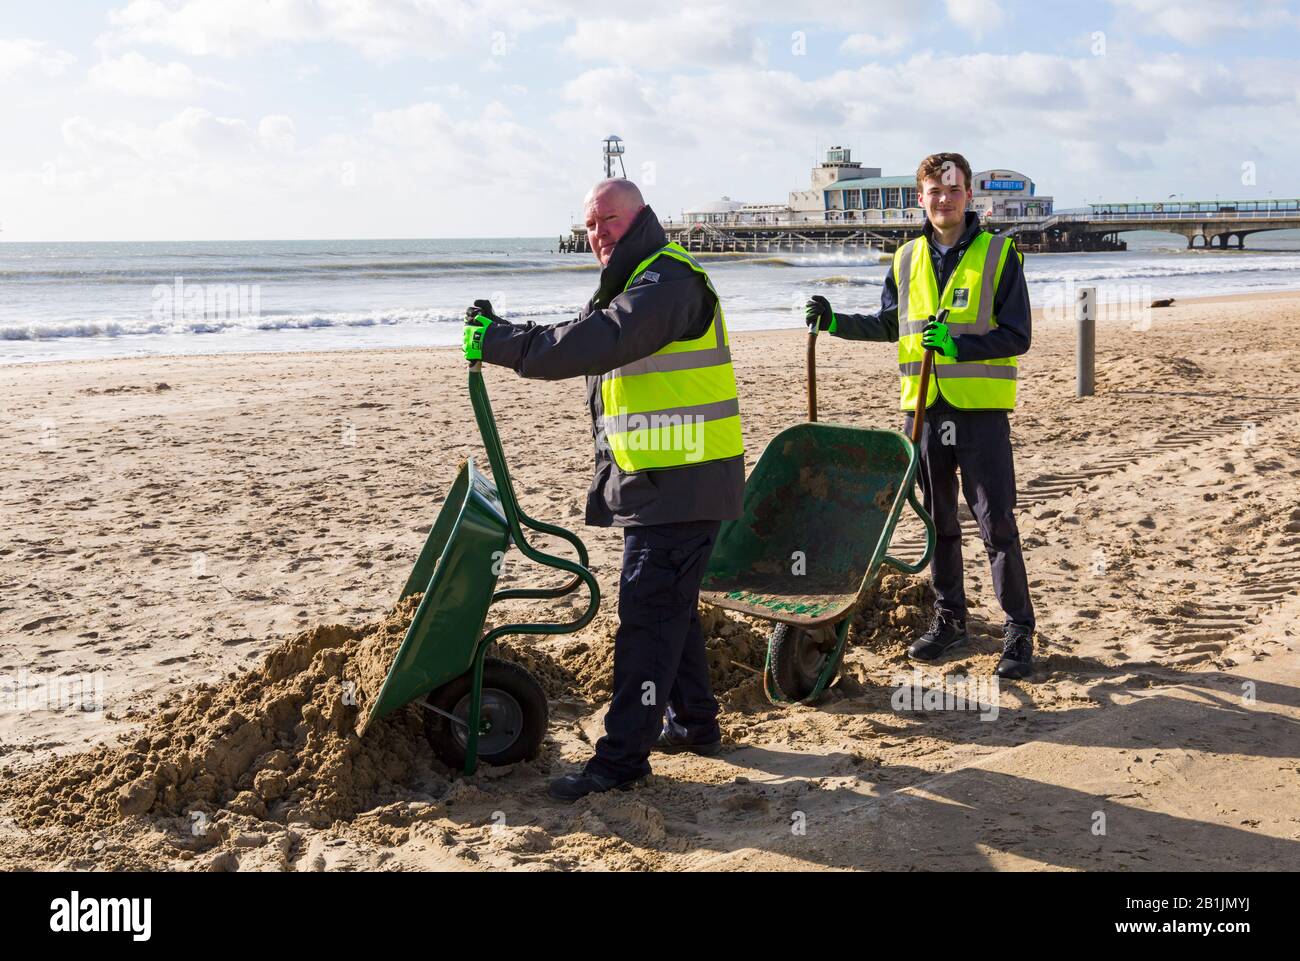 Bournemouth, Dorset, UK. 26th Feb 2020. Councillor Lewis Allison (right), gets stuck in and gives the seafront rangers (Terry, left) a hand to clear the sand from the promenade, blown up from the recent strong winds and Storm Dennis.   Councillor Allison is Labour Councillor for Boscombe West and Portfolio Holder, Cabinet Member, for Tourism, Leisure and Communities at BCP (Bournemouth, Christchurch and Poole) Council.  Credit: Carolyn Jenkins/Alamy Live News Stock Photo